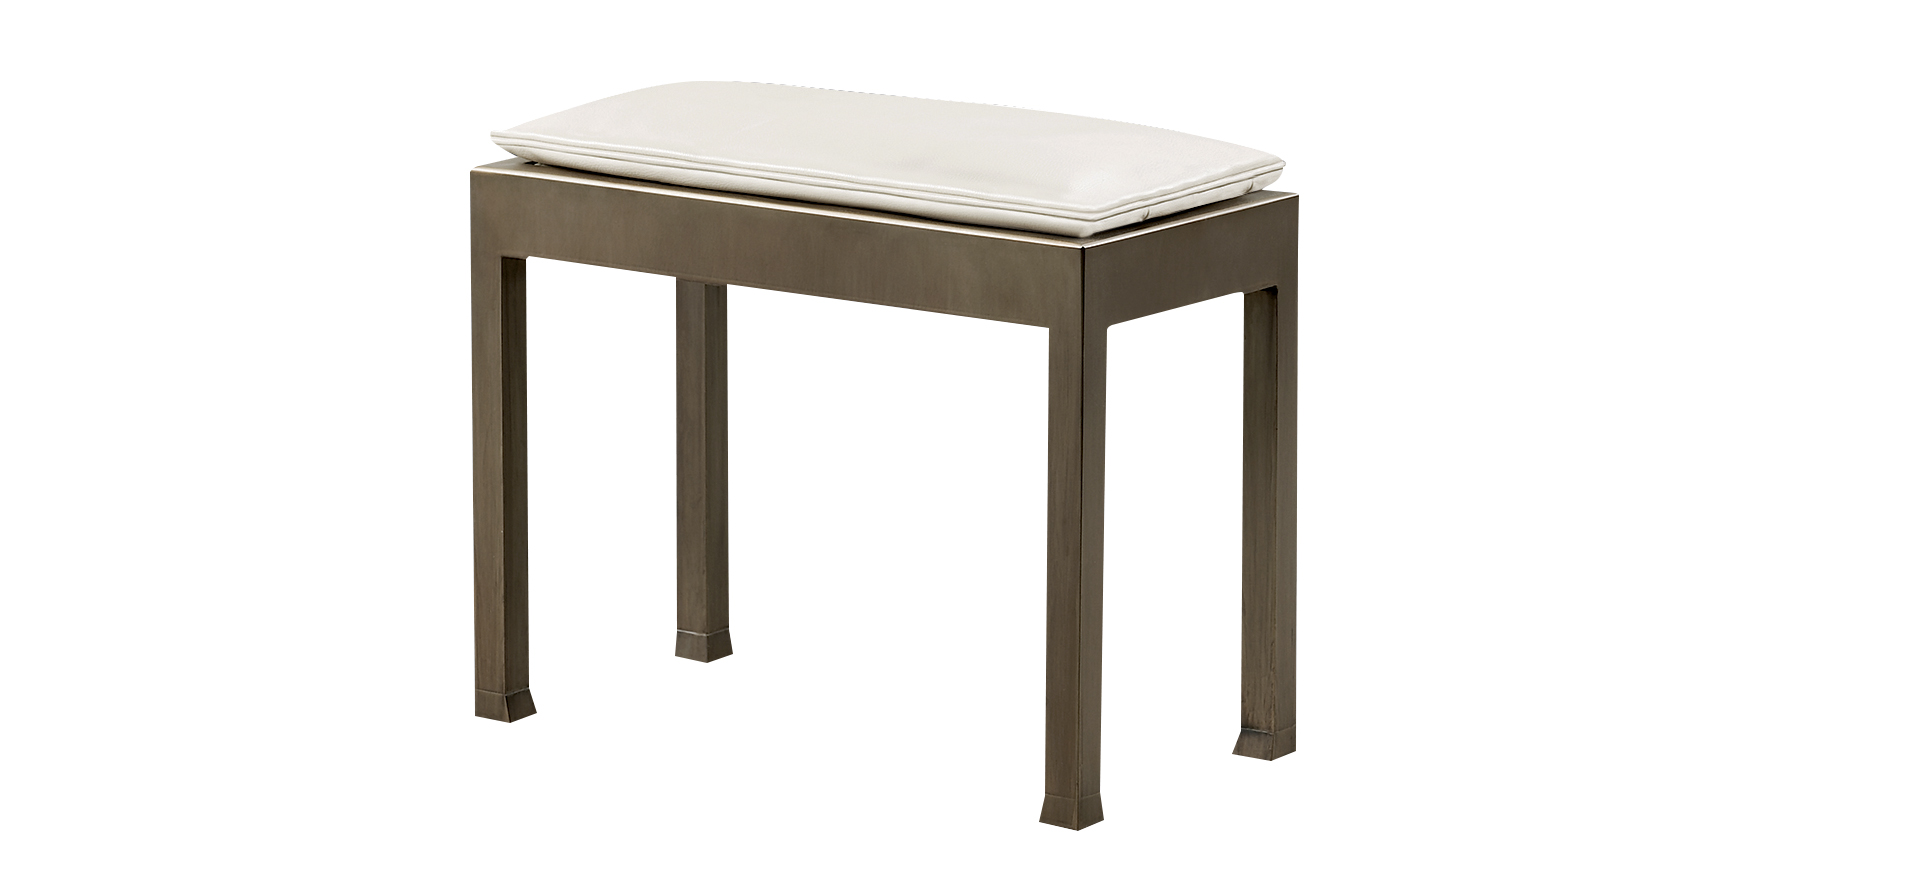 Gong is a bronze stool with a leather cushion, from Promemoria's catalogue | Promemoria